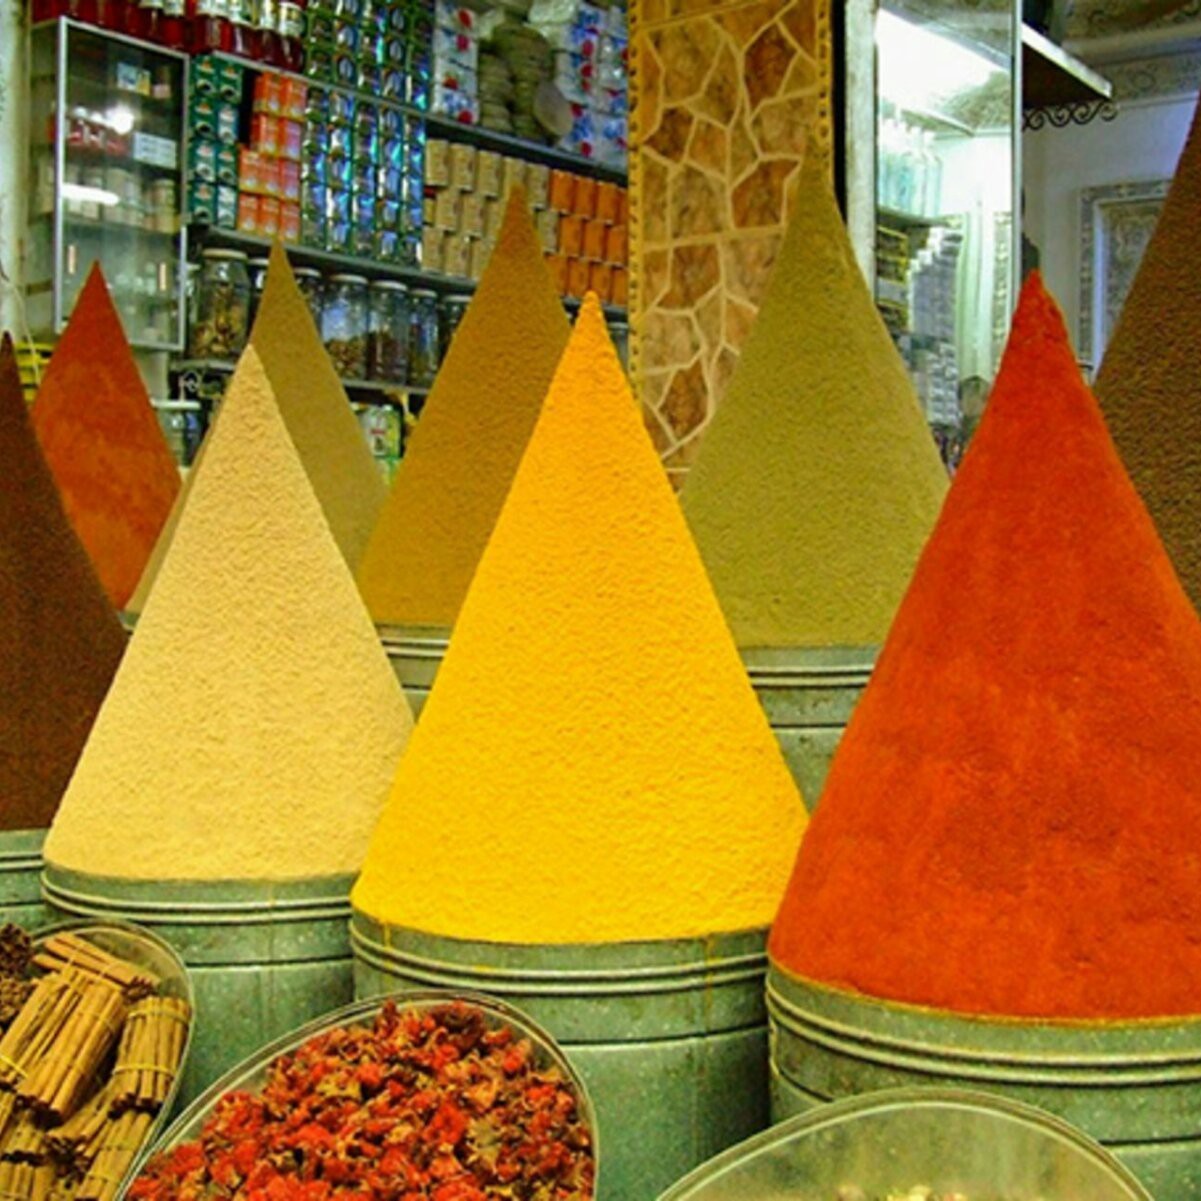 Visually pleasing photo: Moroccan market spices